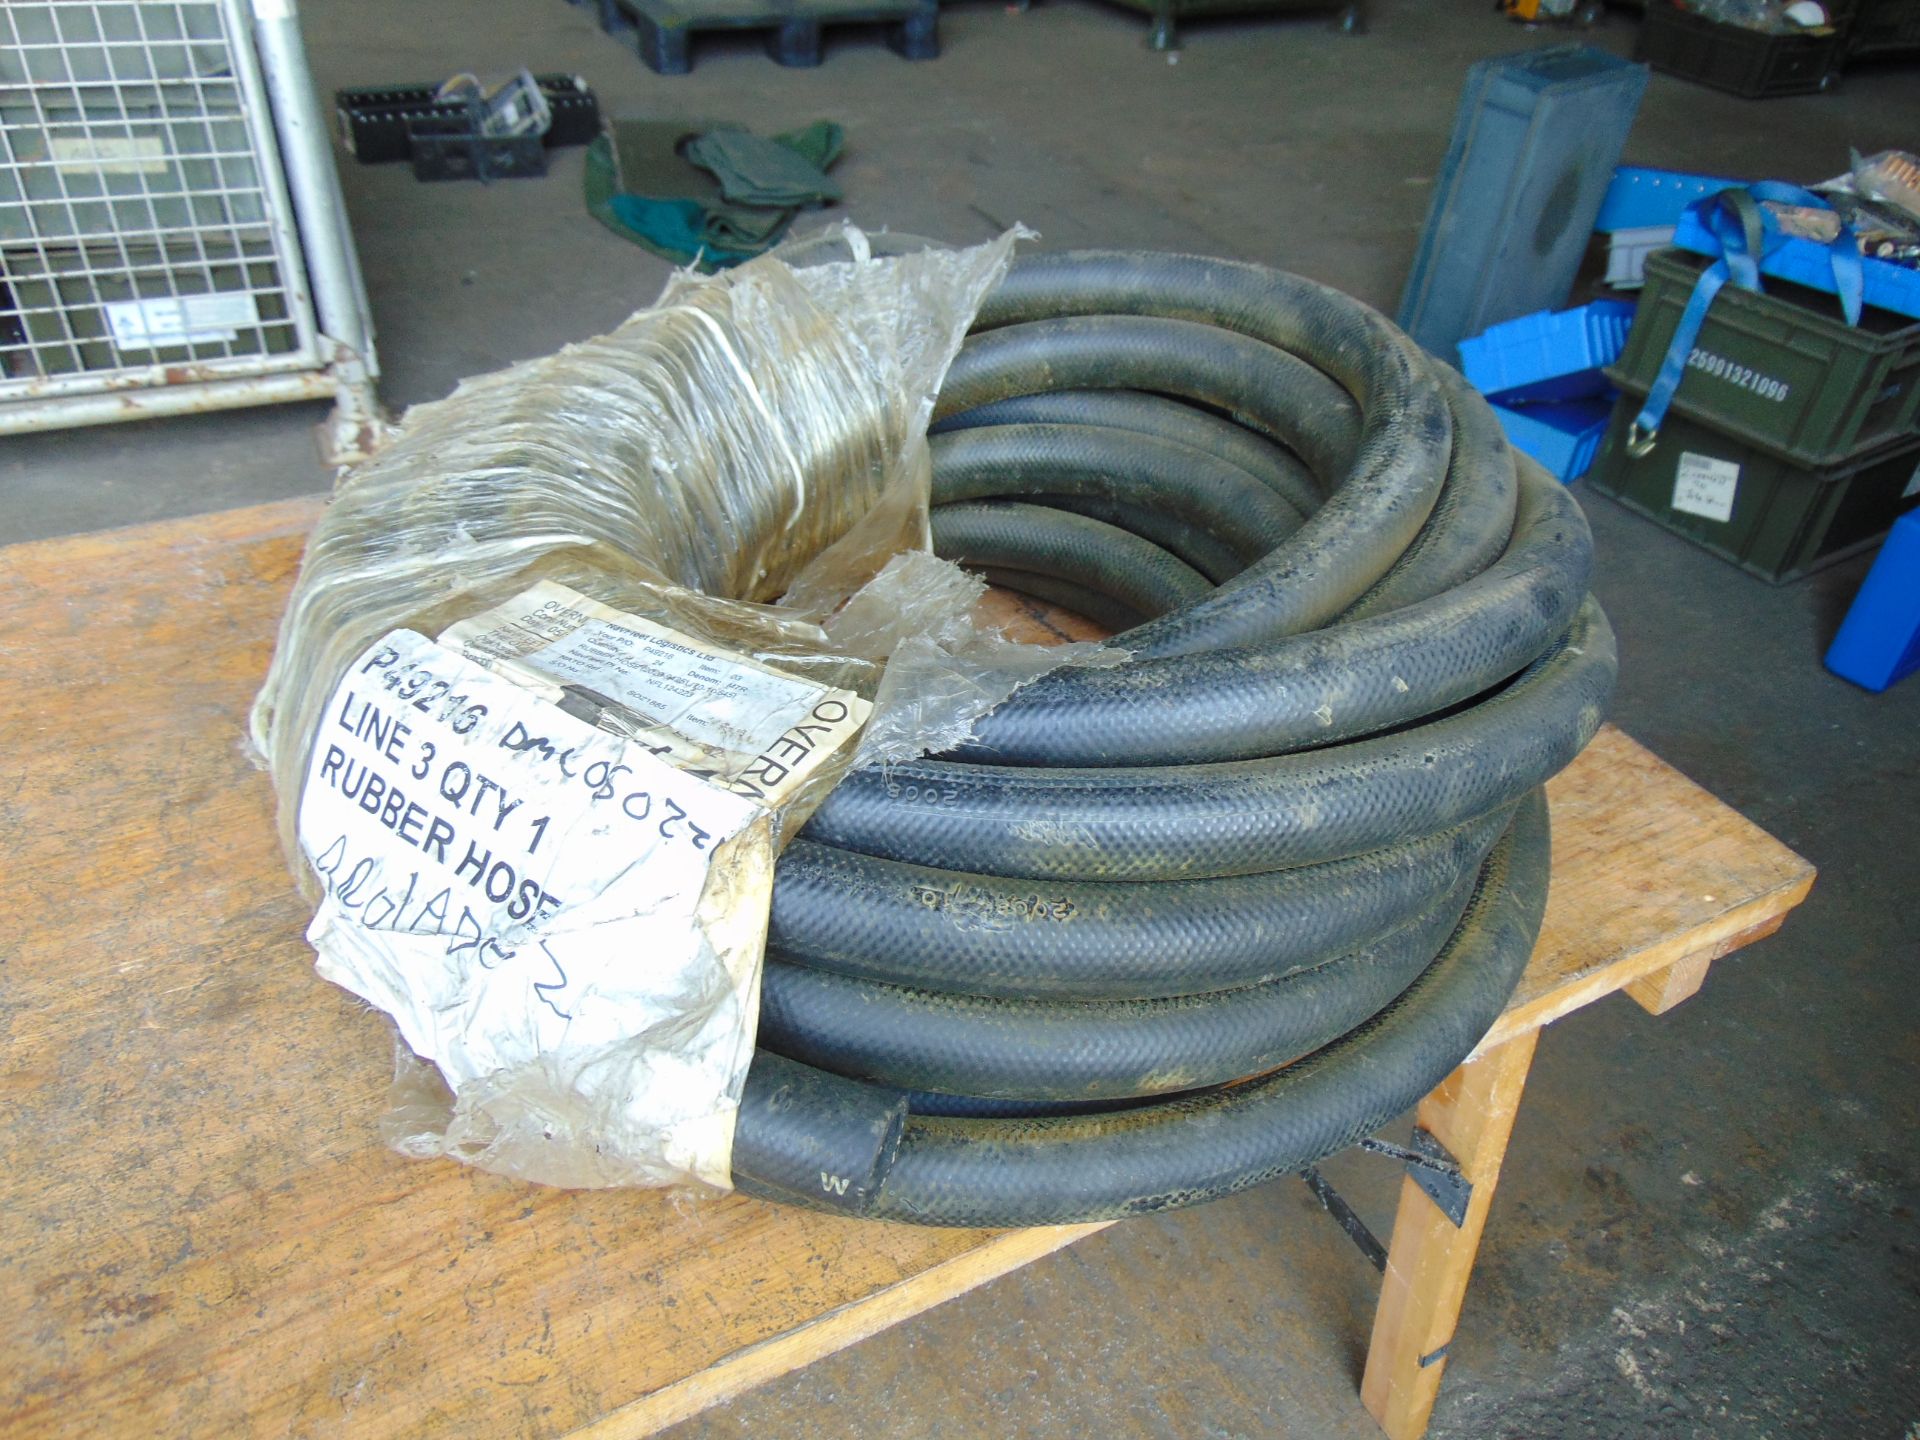 New Unissued 24m Roll 25mm Rubber Hose - Image 5 of 5